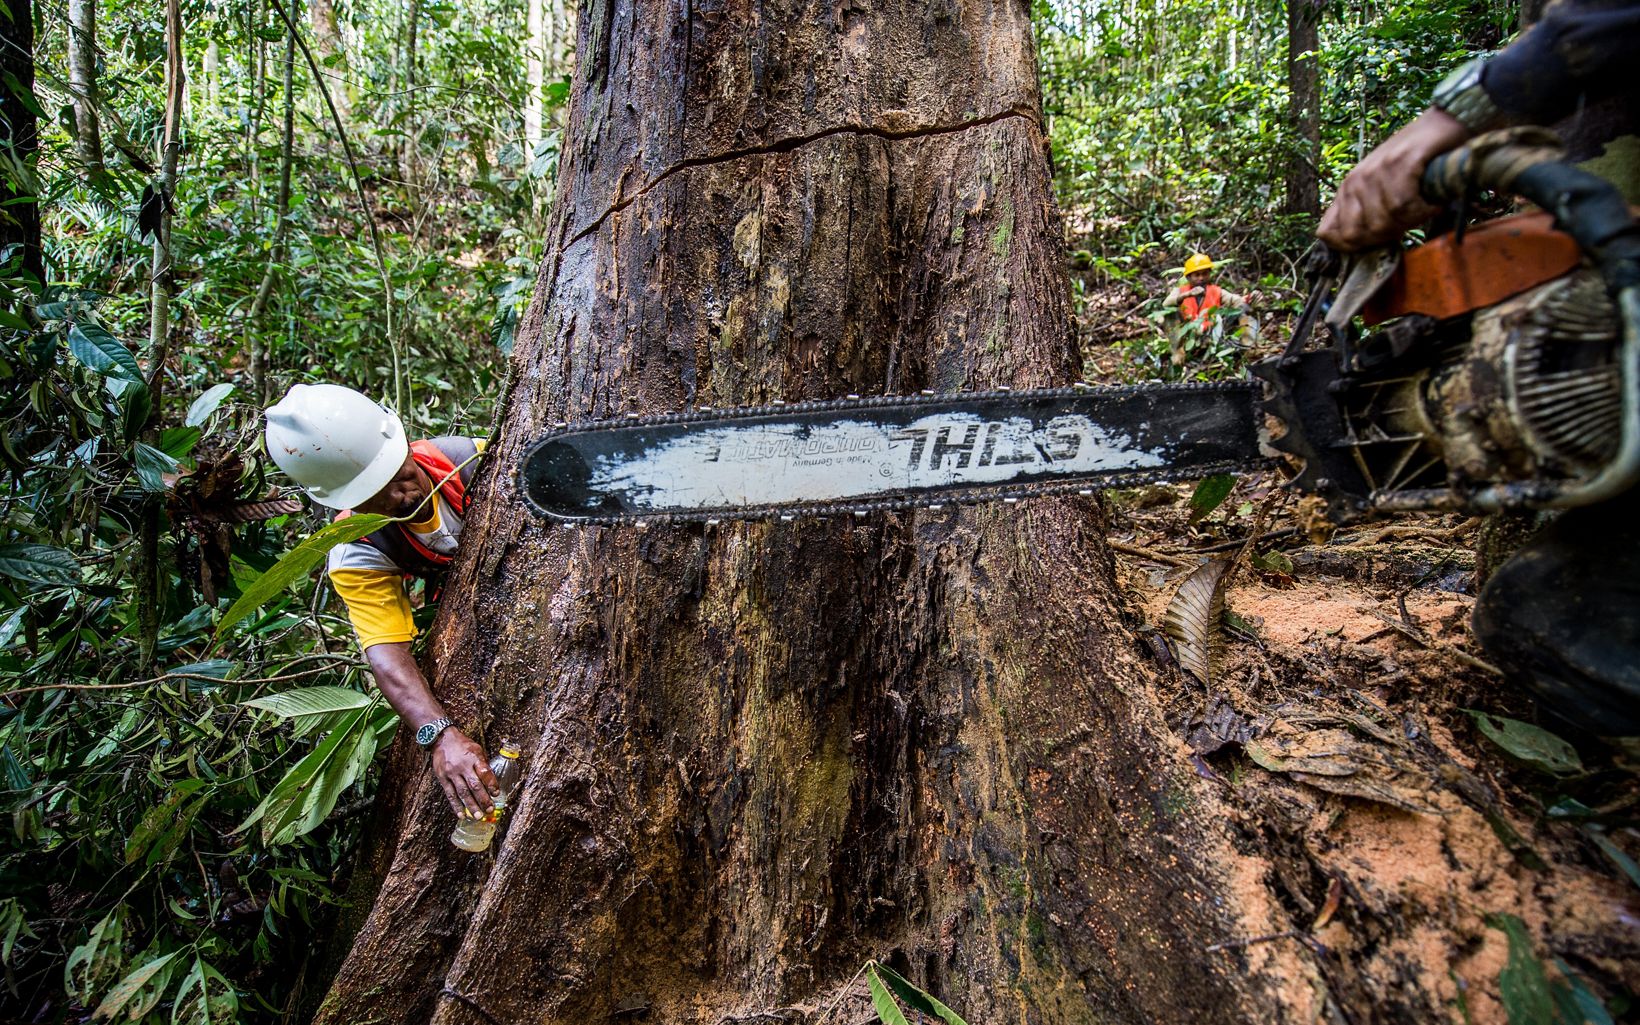 Saw and Tree Marking trees that were cut down at a logging site in East Kalimantan, Indonesia.  © Nick Hall